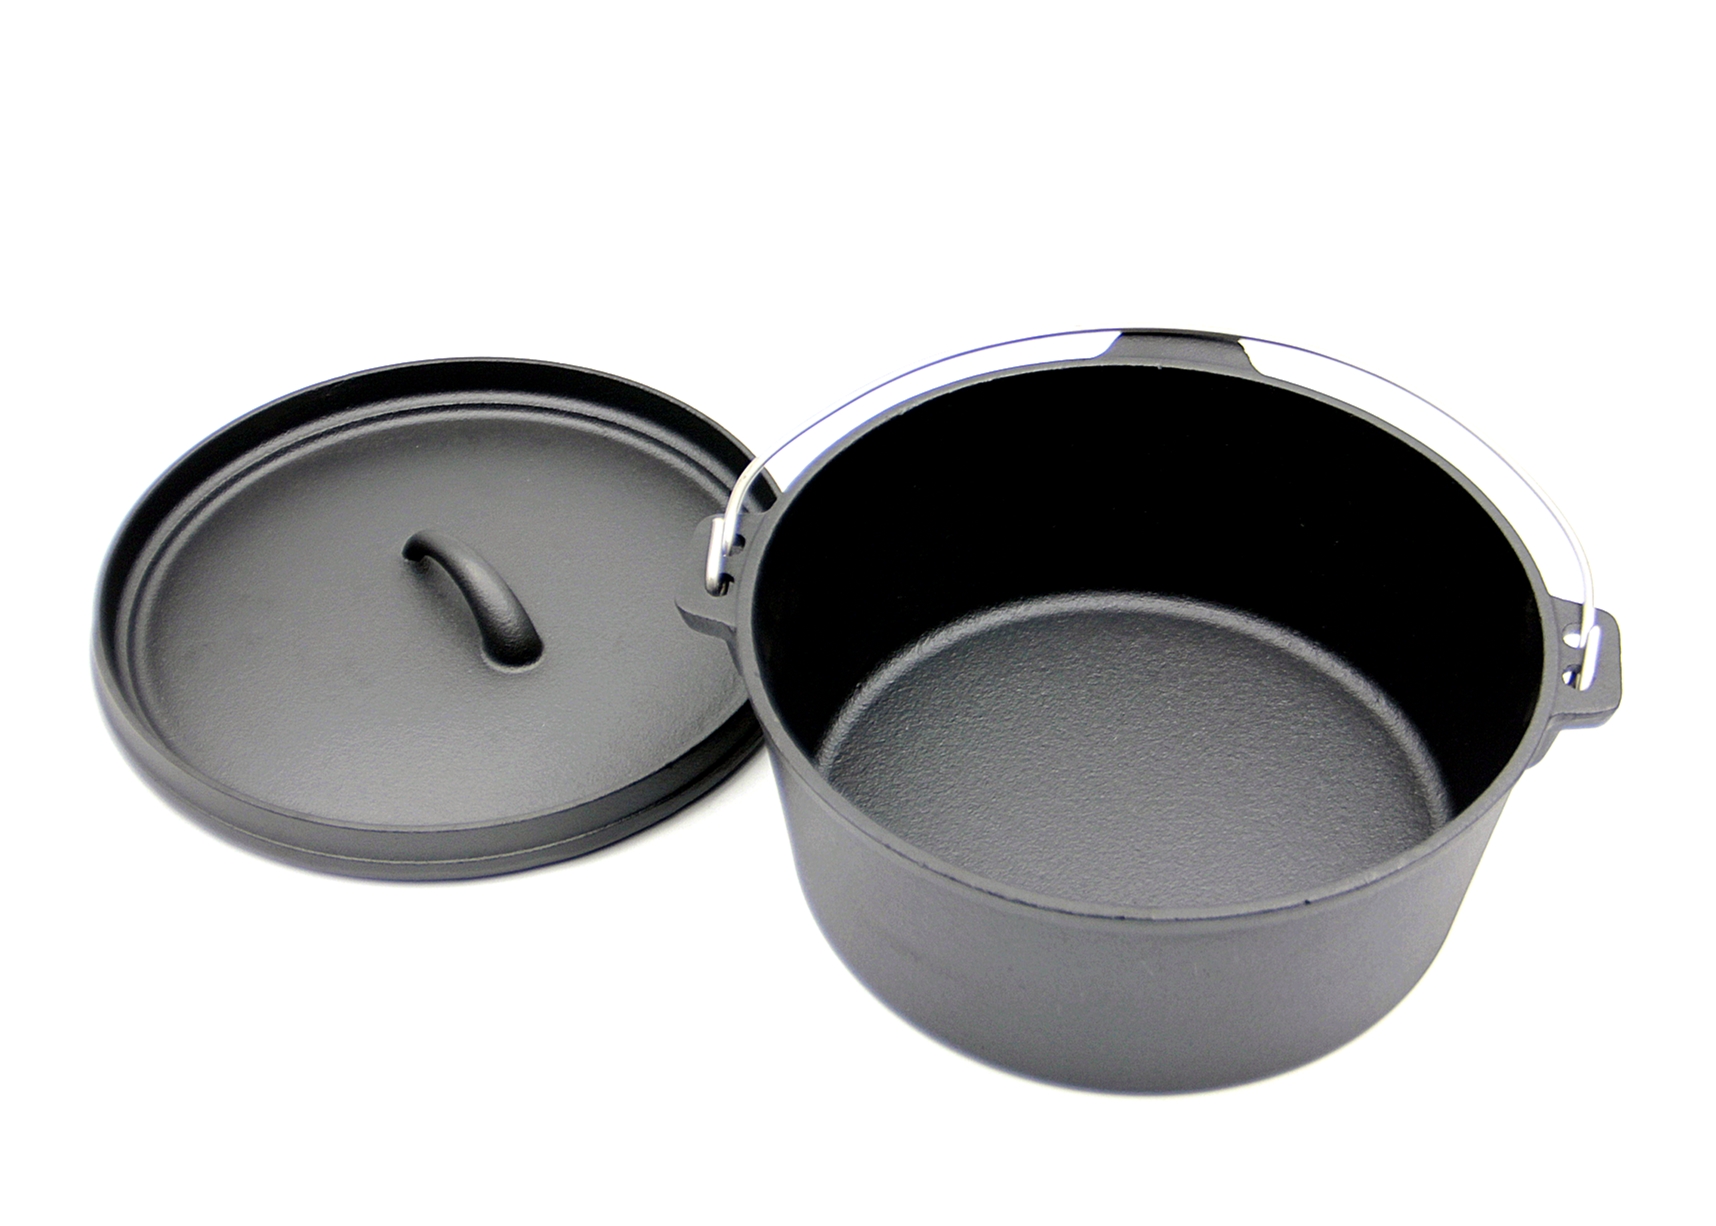 Durable Cast Iron Cookware Set for Cooking